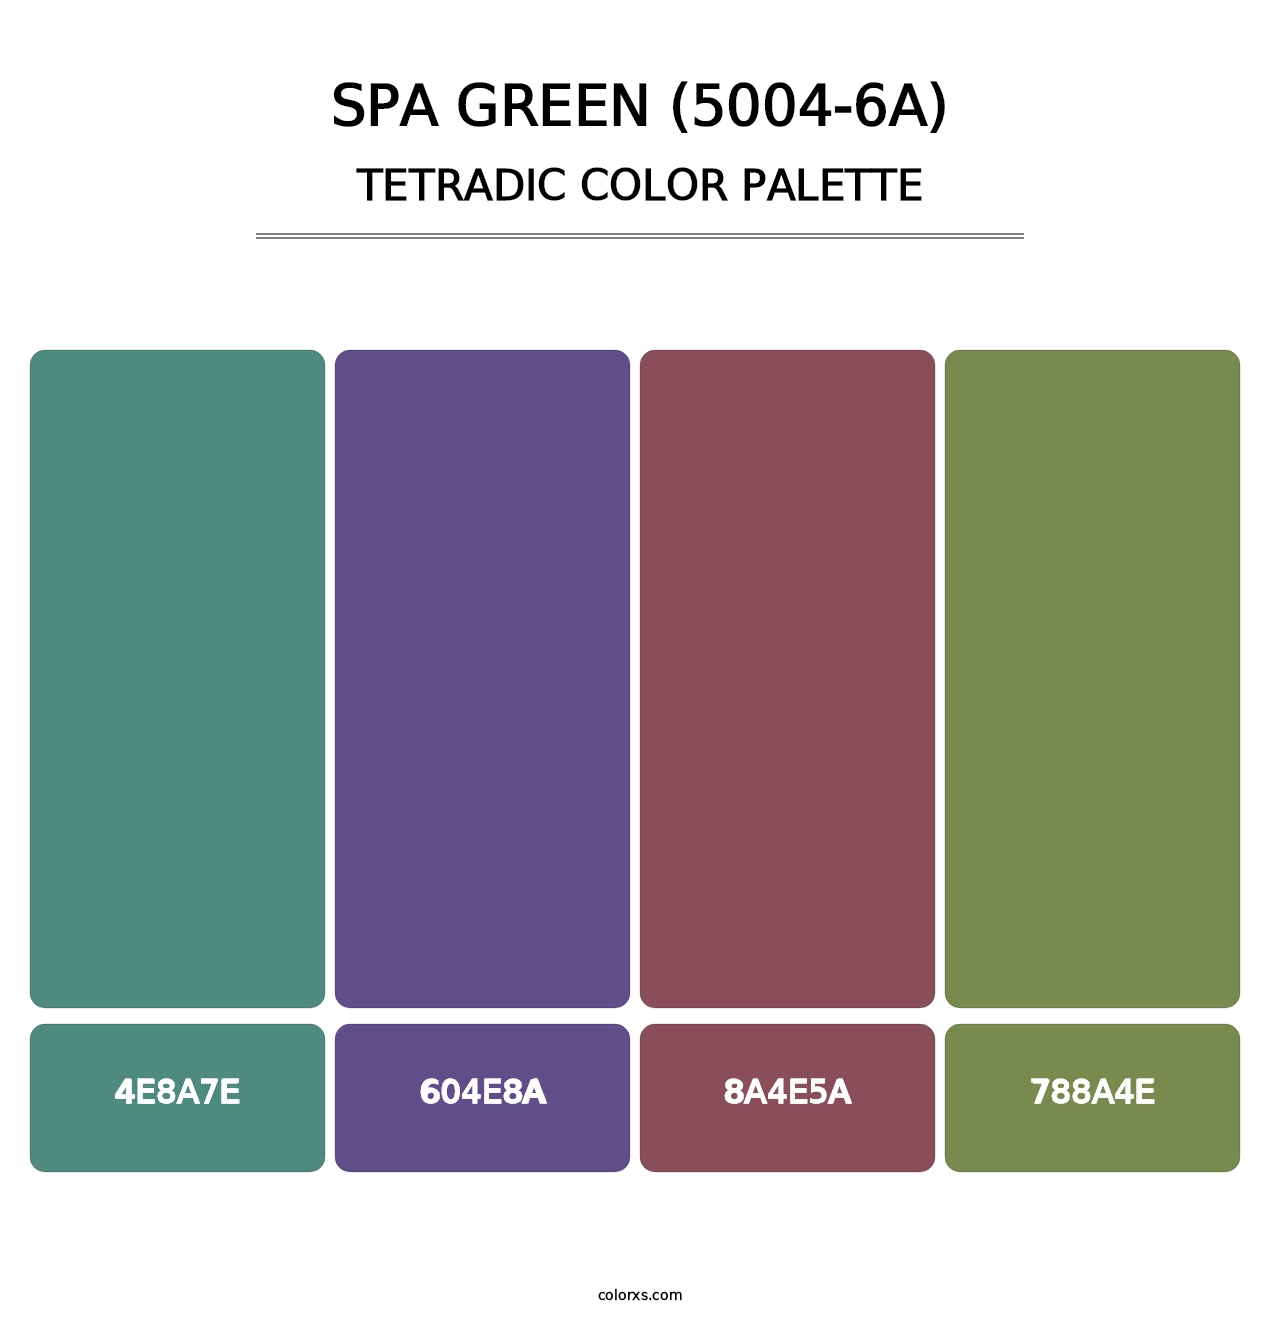 Spa Green (5004-6A) - Tetradic Color Palette